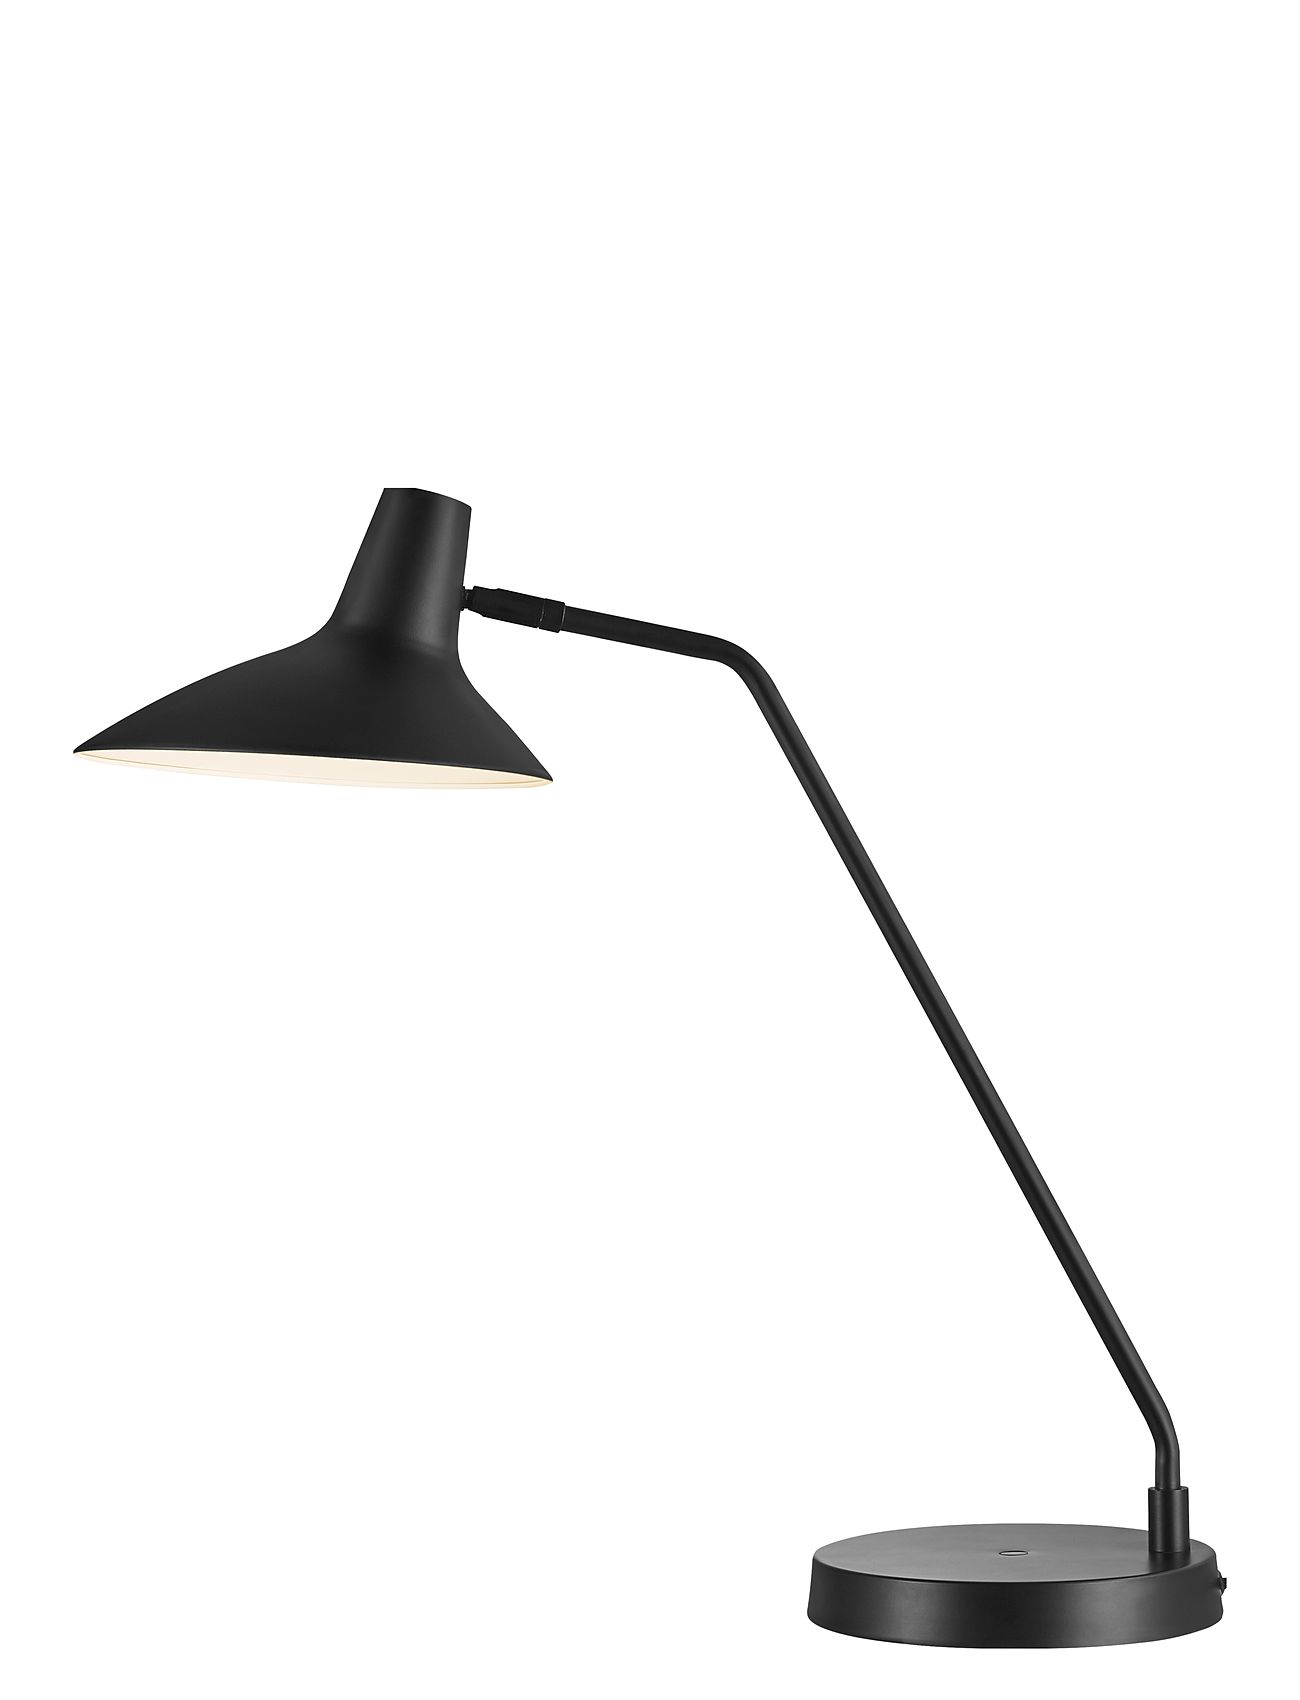 Darci | Bordlampe Home Lighting Lamps Table Lamps Black Design For The People